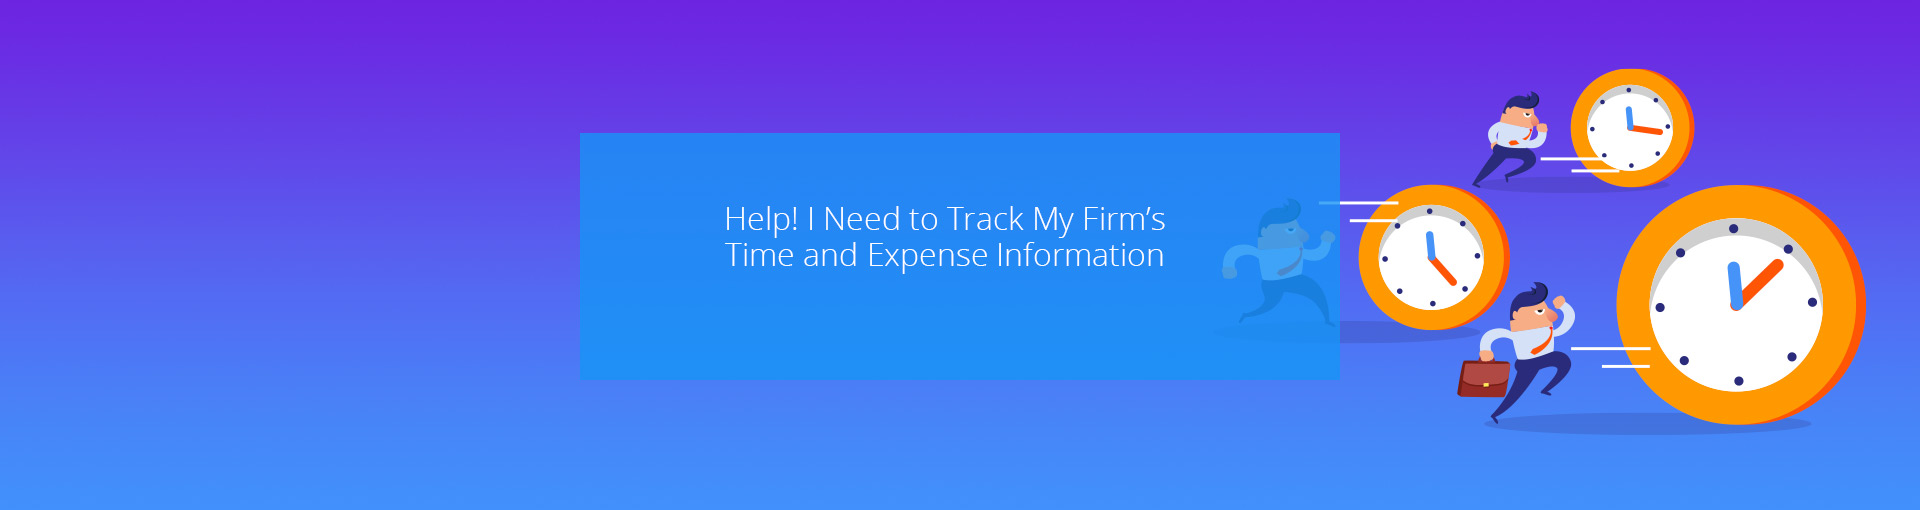 Help! I Need to Track My Firm’s Time and Expense Information Featured Image